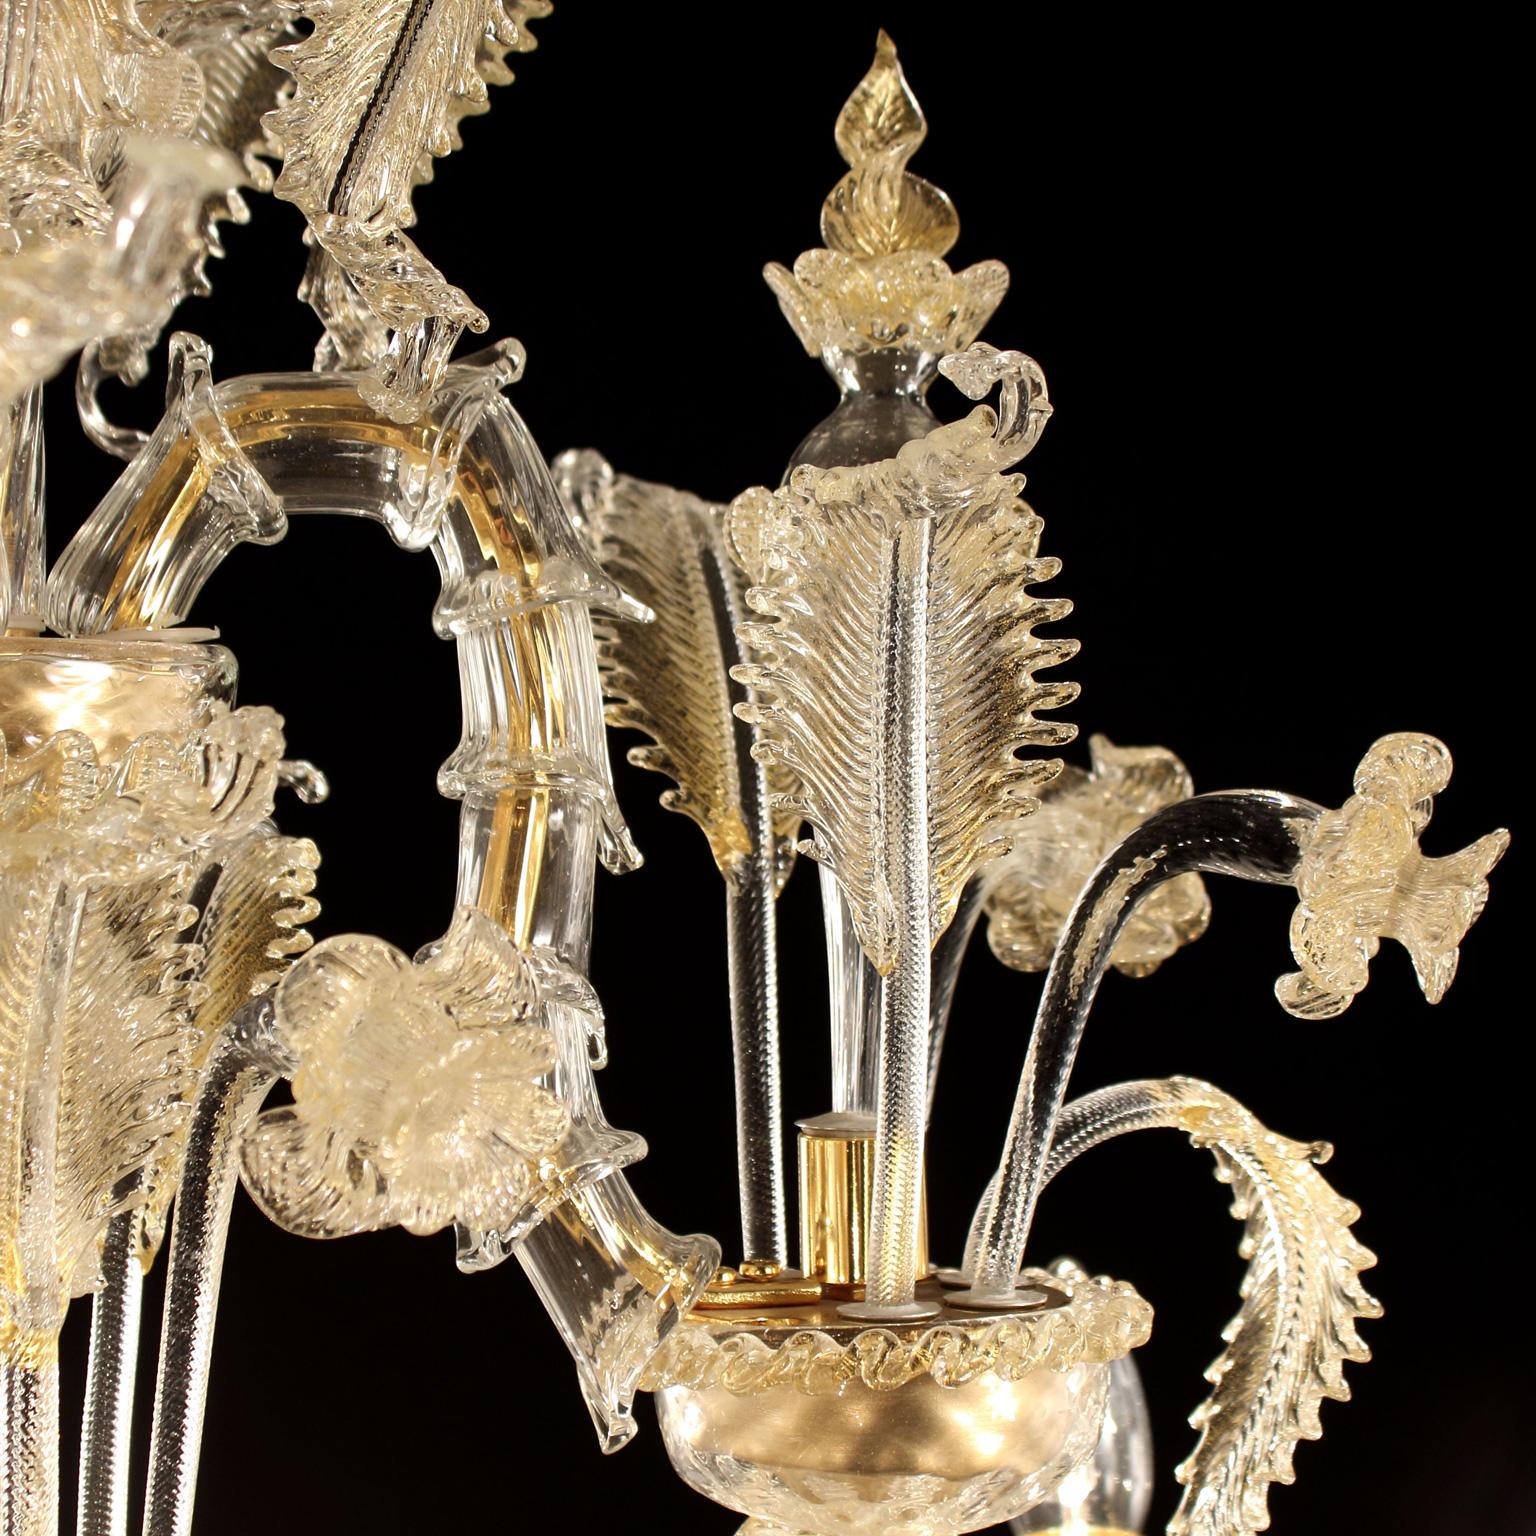 Rezzonico Murano glass Chandelier 6 arms Golden Leaf Caesar by Multiforme In New Condition For Sale In Trebaseleghe, IT